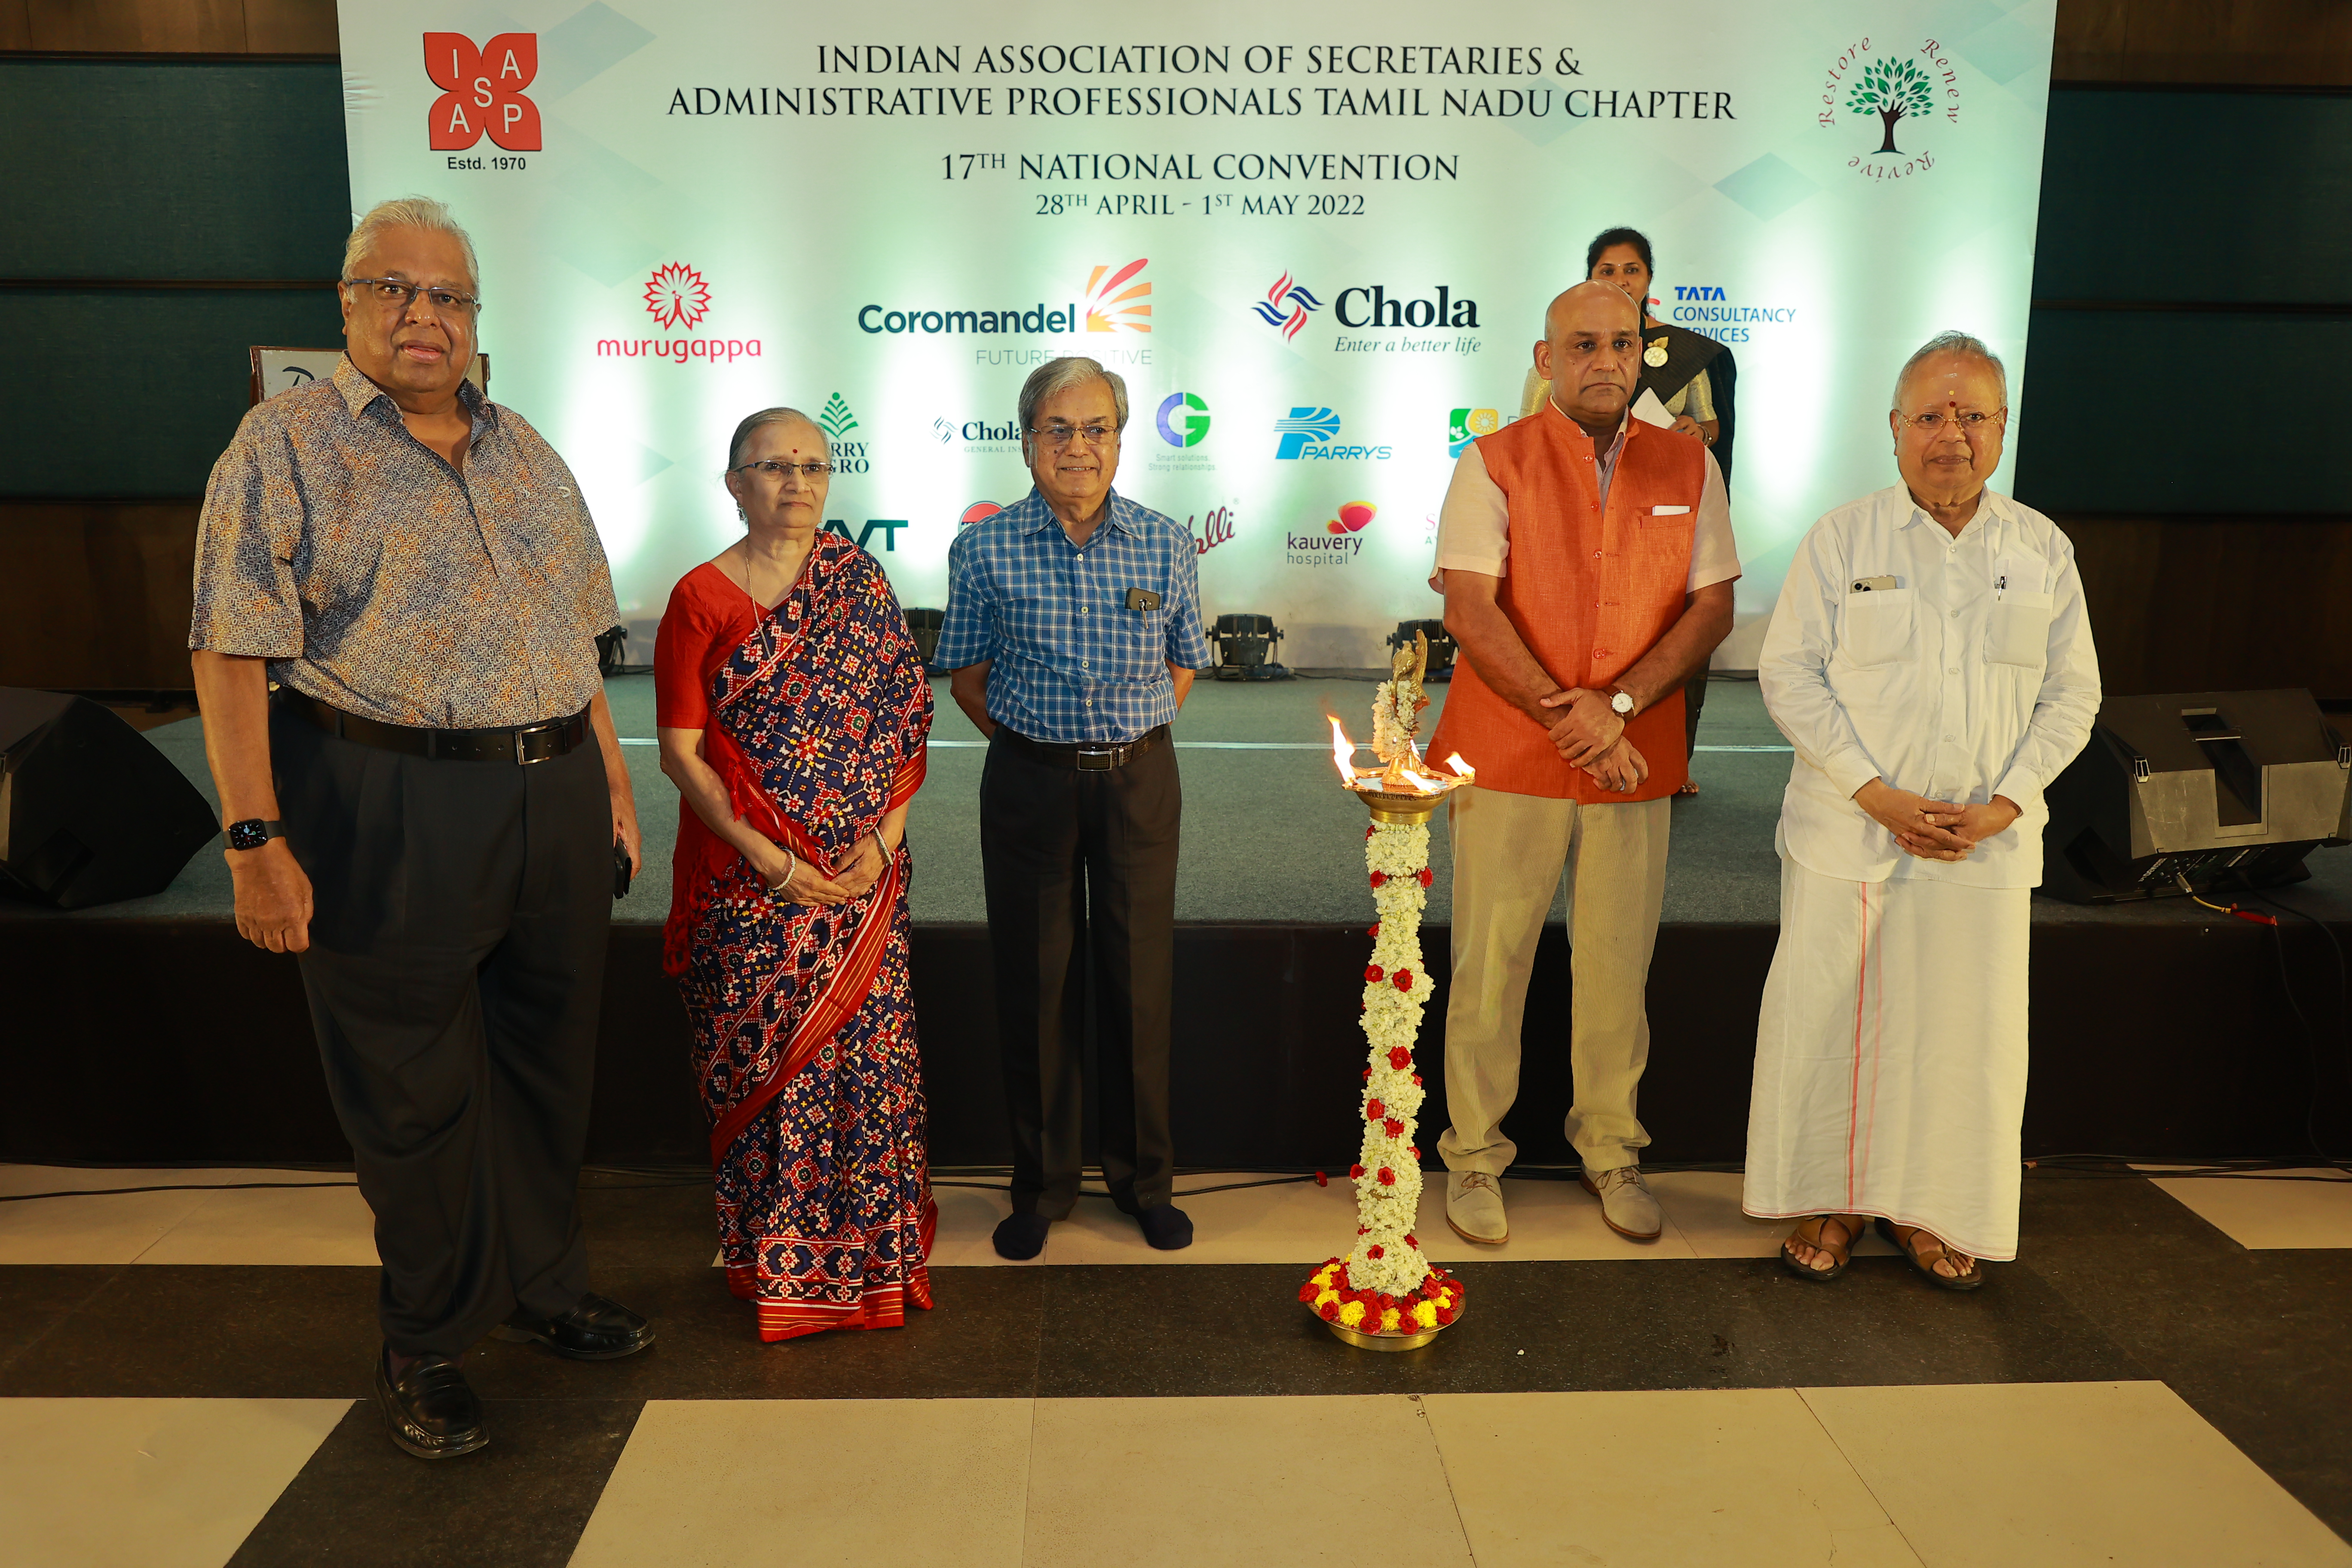 IASAP’s conducted the 17th National Convention in Tamil Nadu